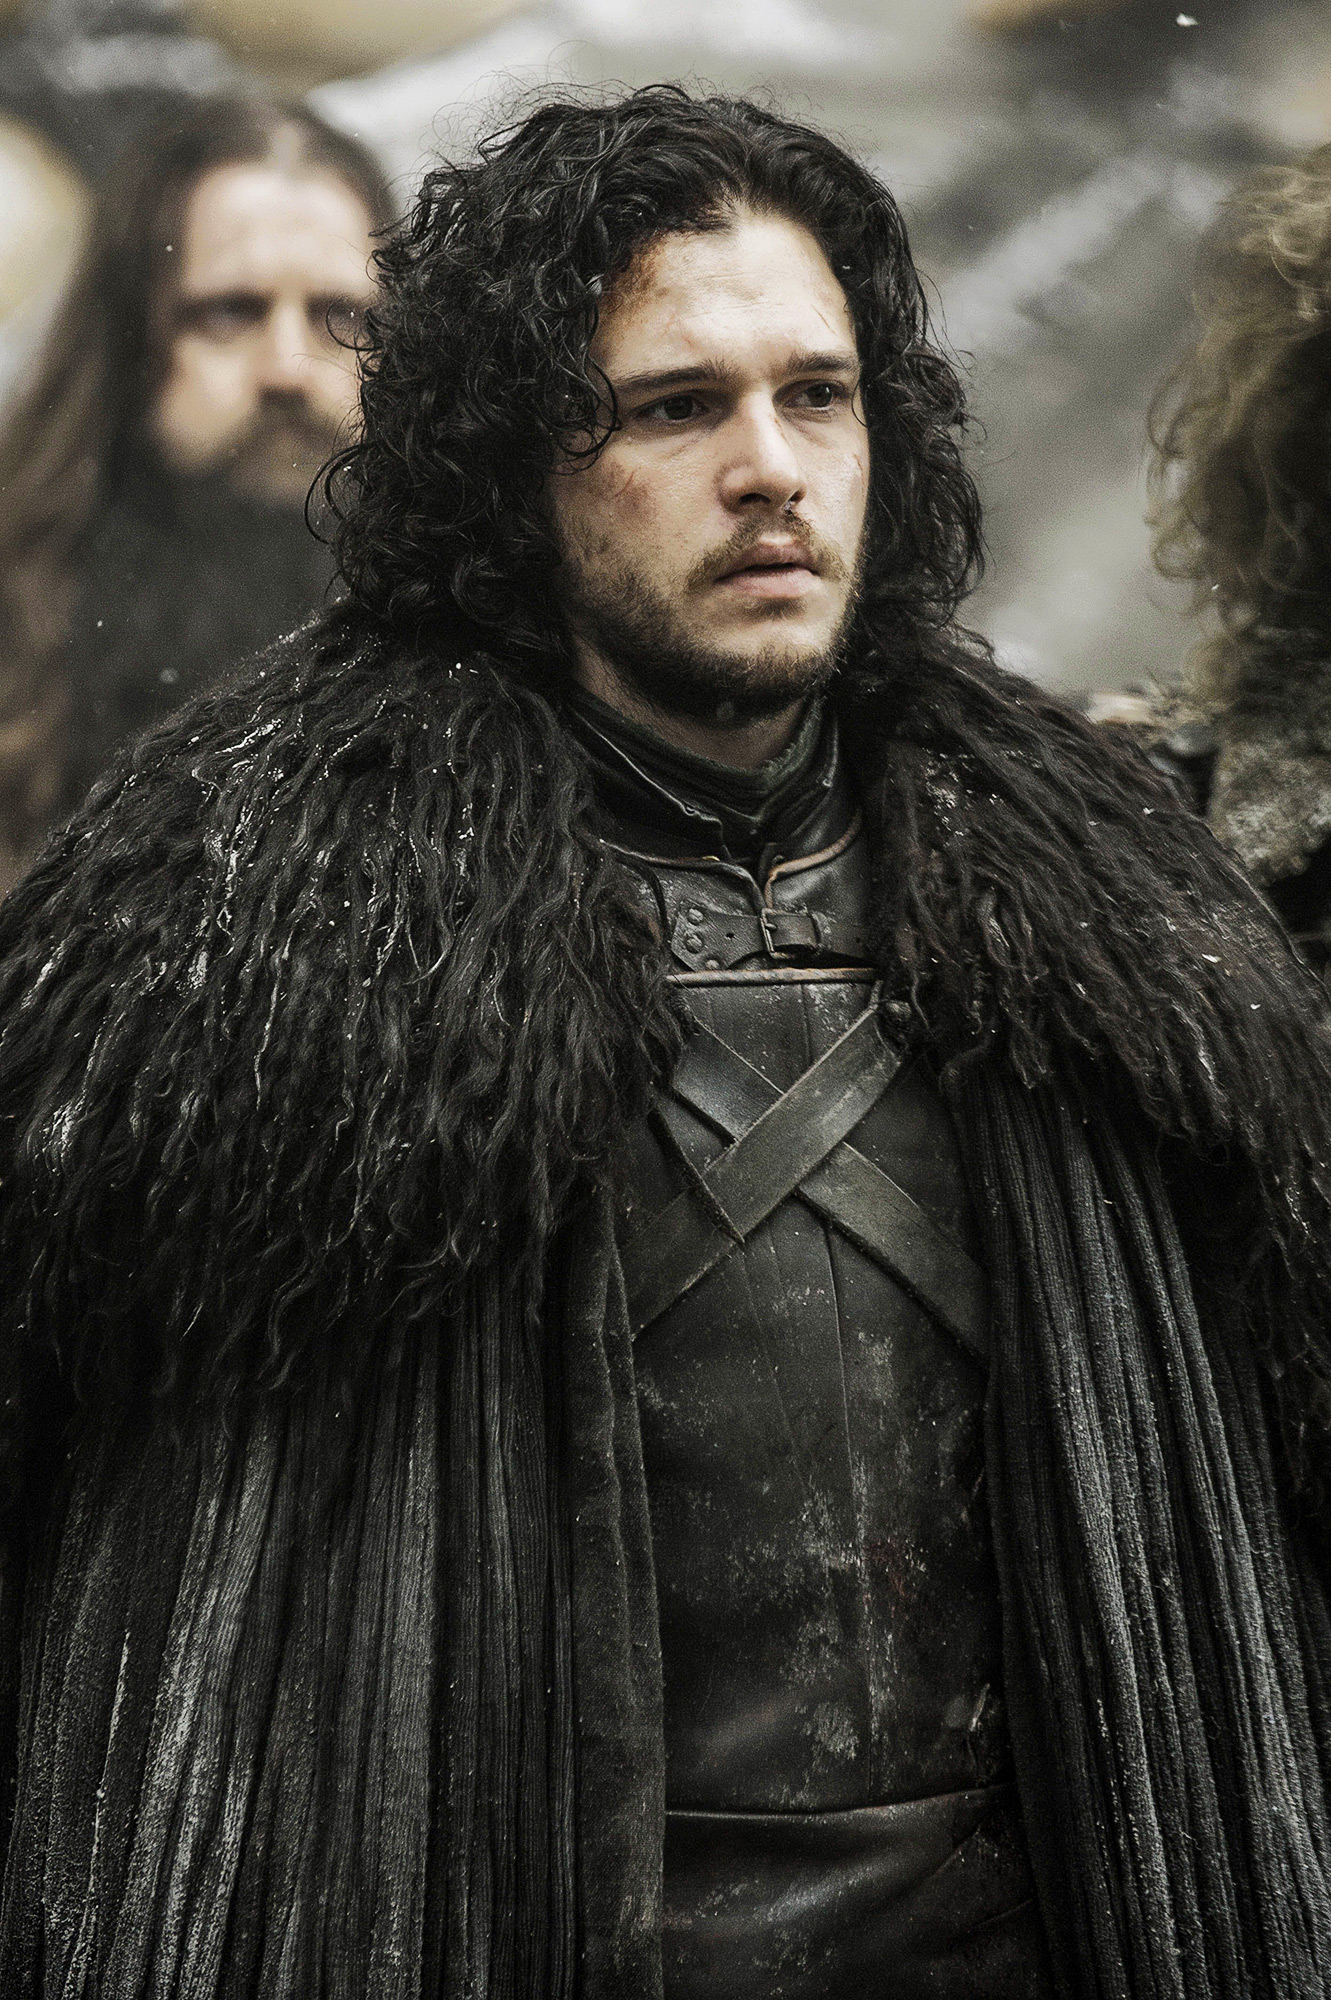 Game of Thrones Season 1  Official Website for the HBO Series